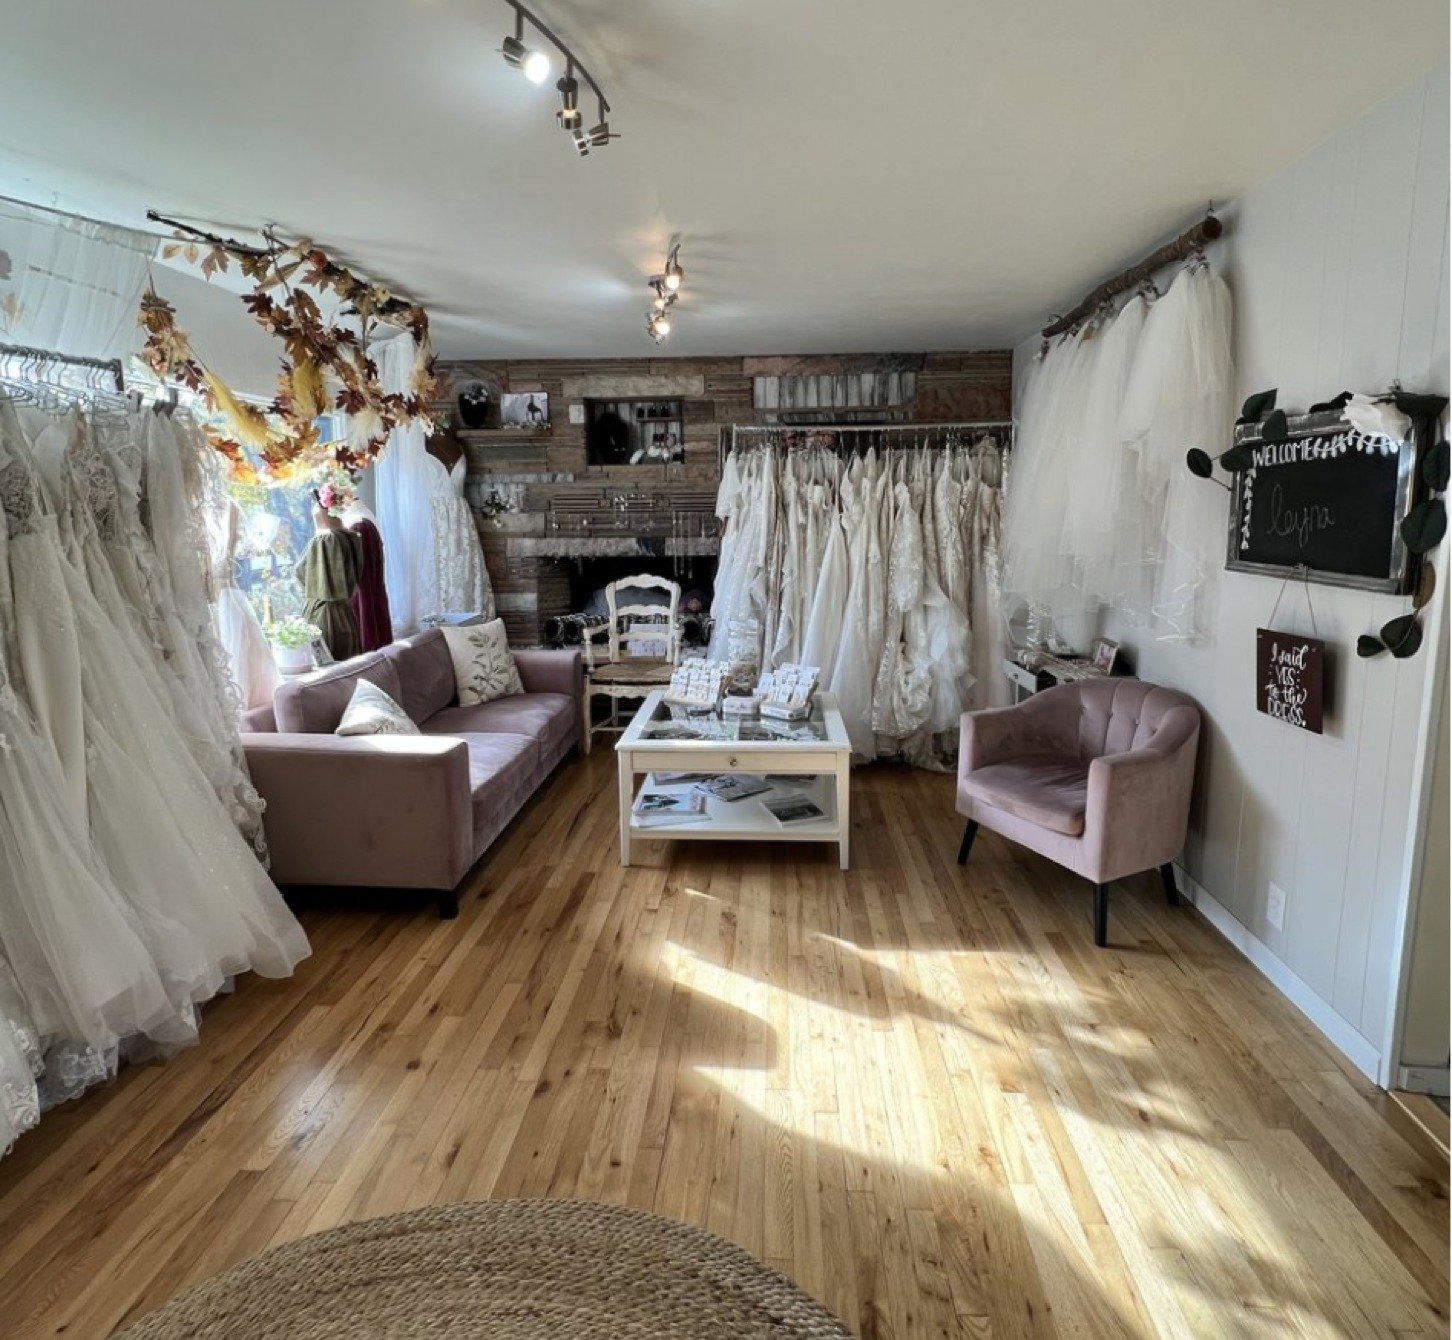 👰✨ @bateaubridalboutique &amp; I caught up to chat about all things #AlaskaWeddings! 

Tara, the owner of #BateauBridalBoutique in Anchorage, AK 🏔️ has 9 years of experience. She curates a cozy, appointment-only haven for brides seeking quality, in